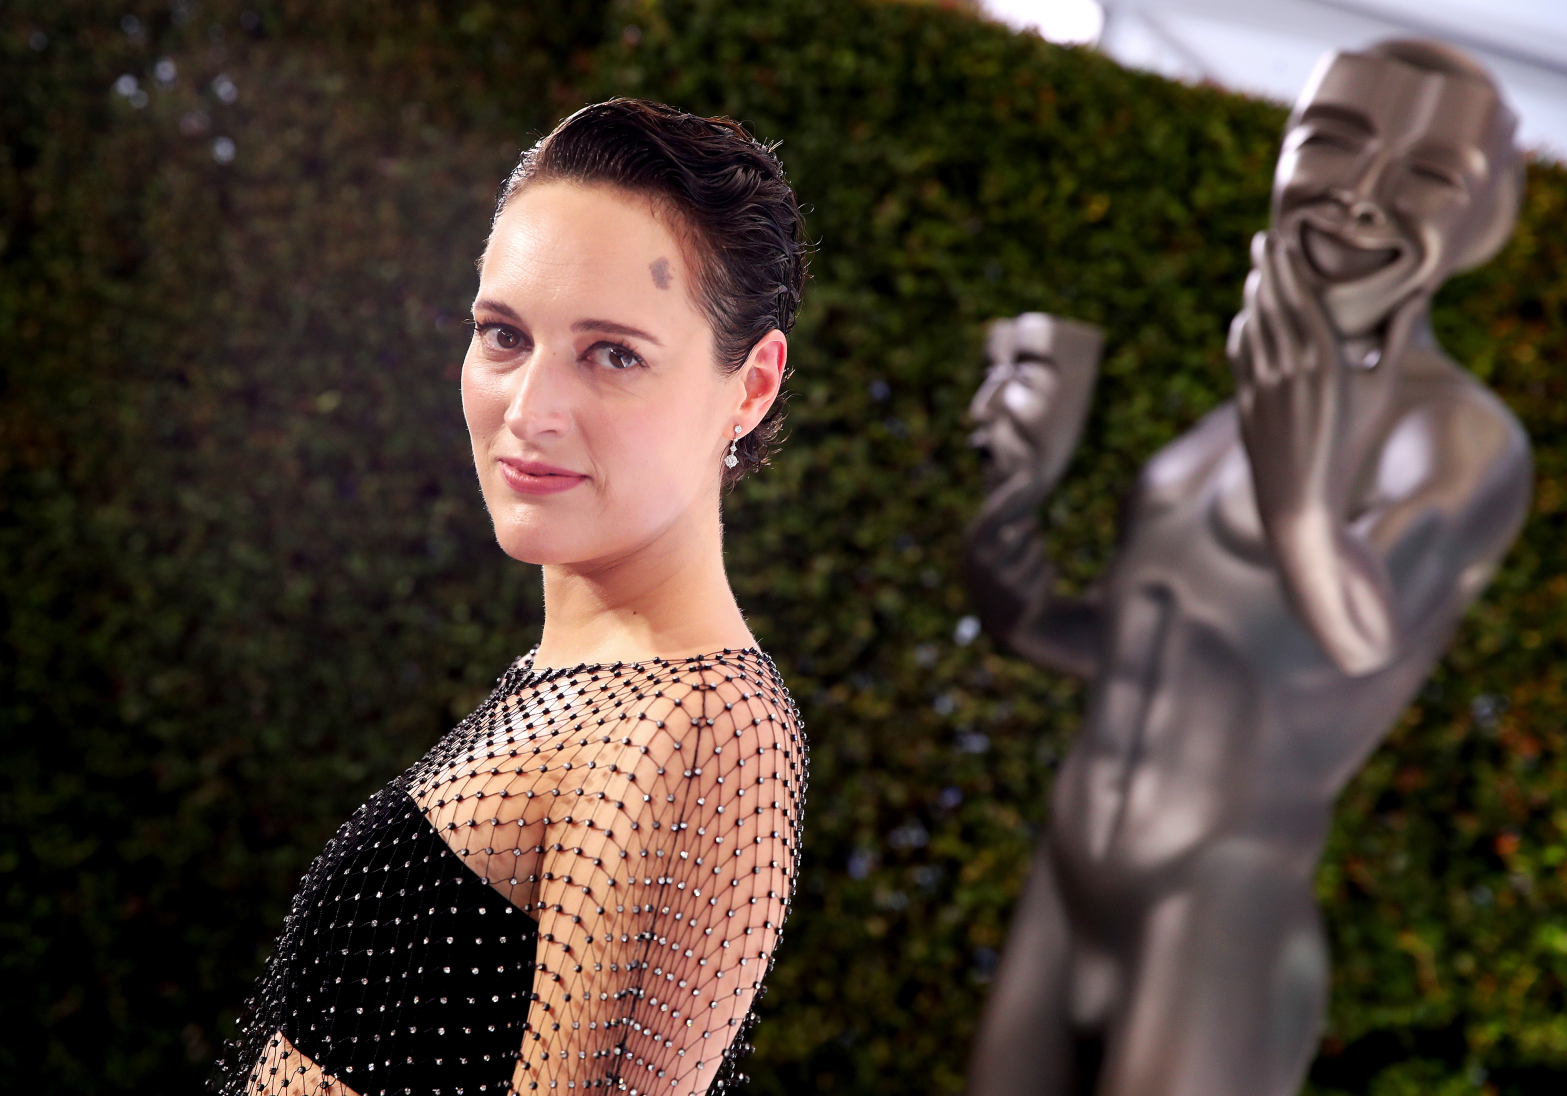 Phoebe Waller-Bridge attends the 26th Annual Screen Actors Guild Awards at The Shrine Auditorium on January 19, 2020 in Los Angeles, California. (Photo: Rich Fury, Getty Images)